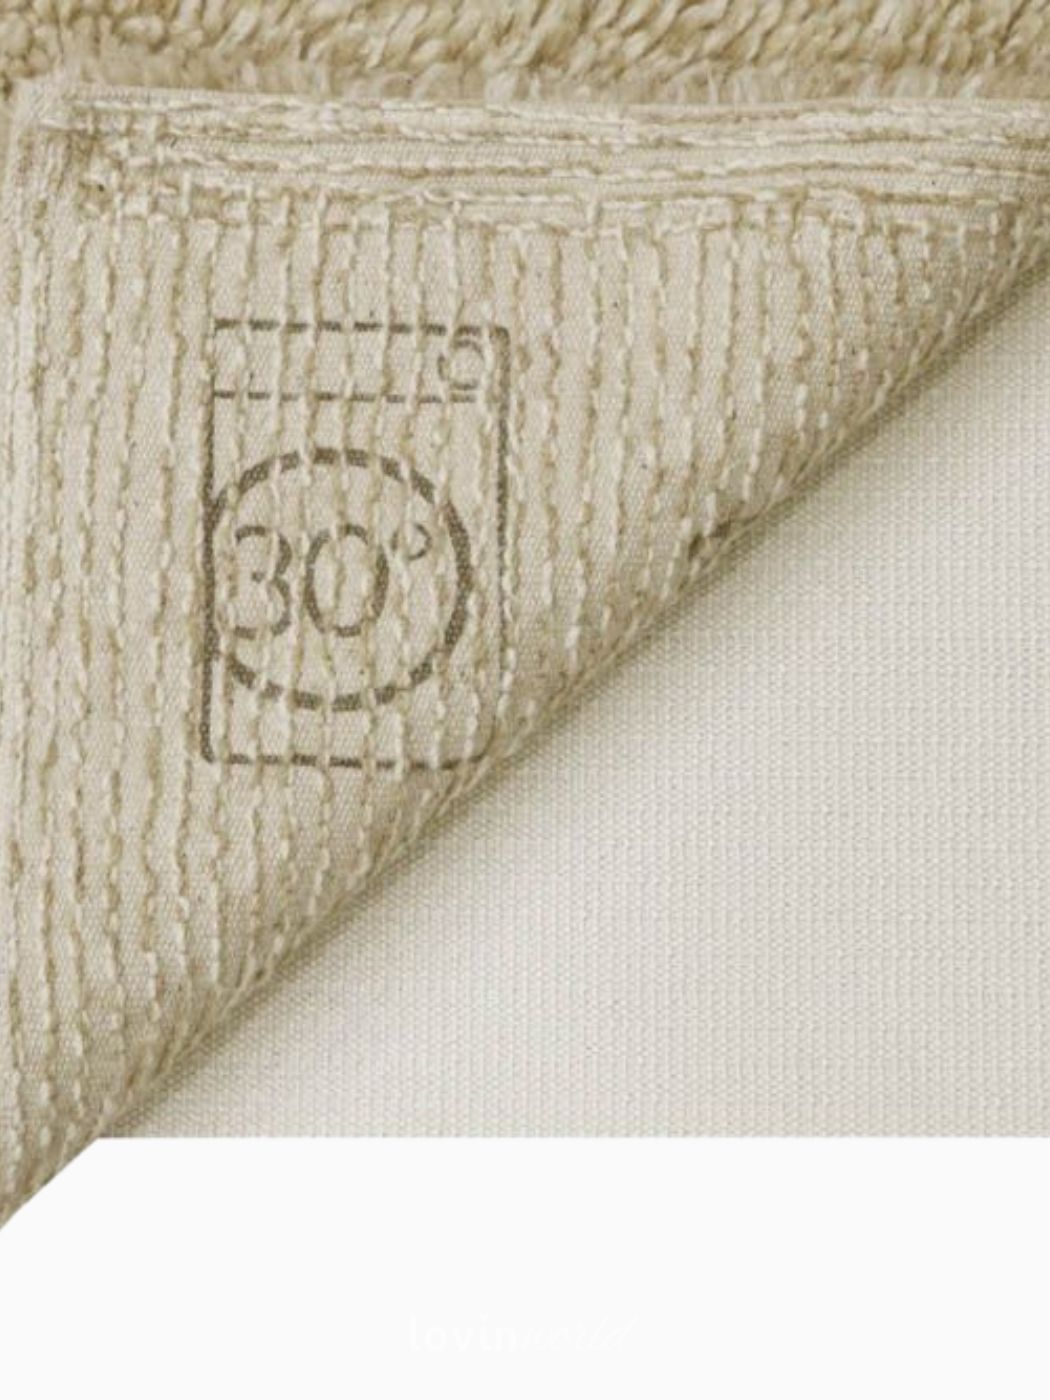 Tappeto di lana Tundra Blended Sheep, in colore beige-3